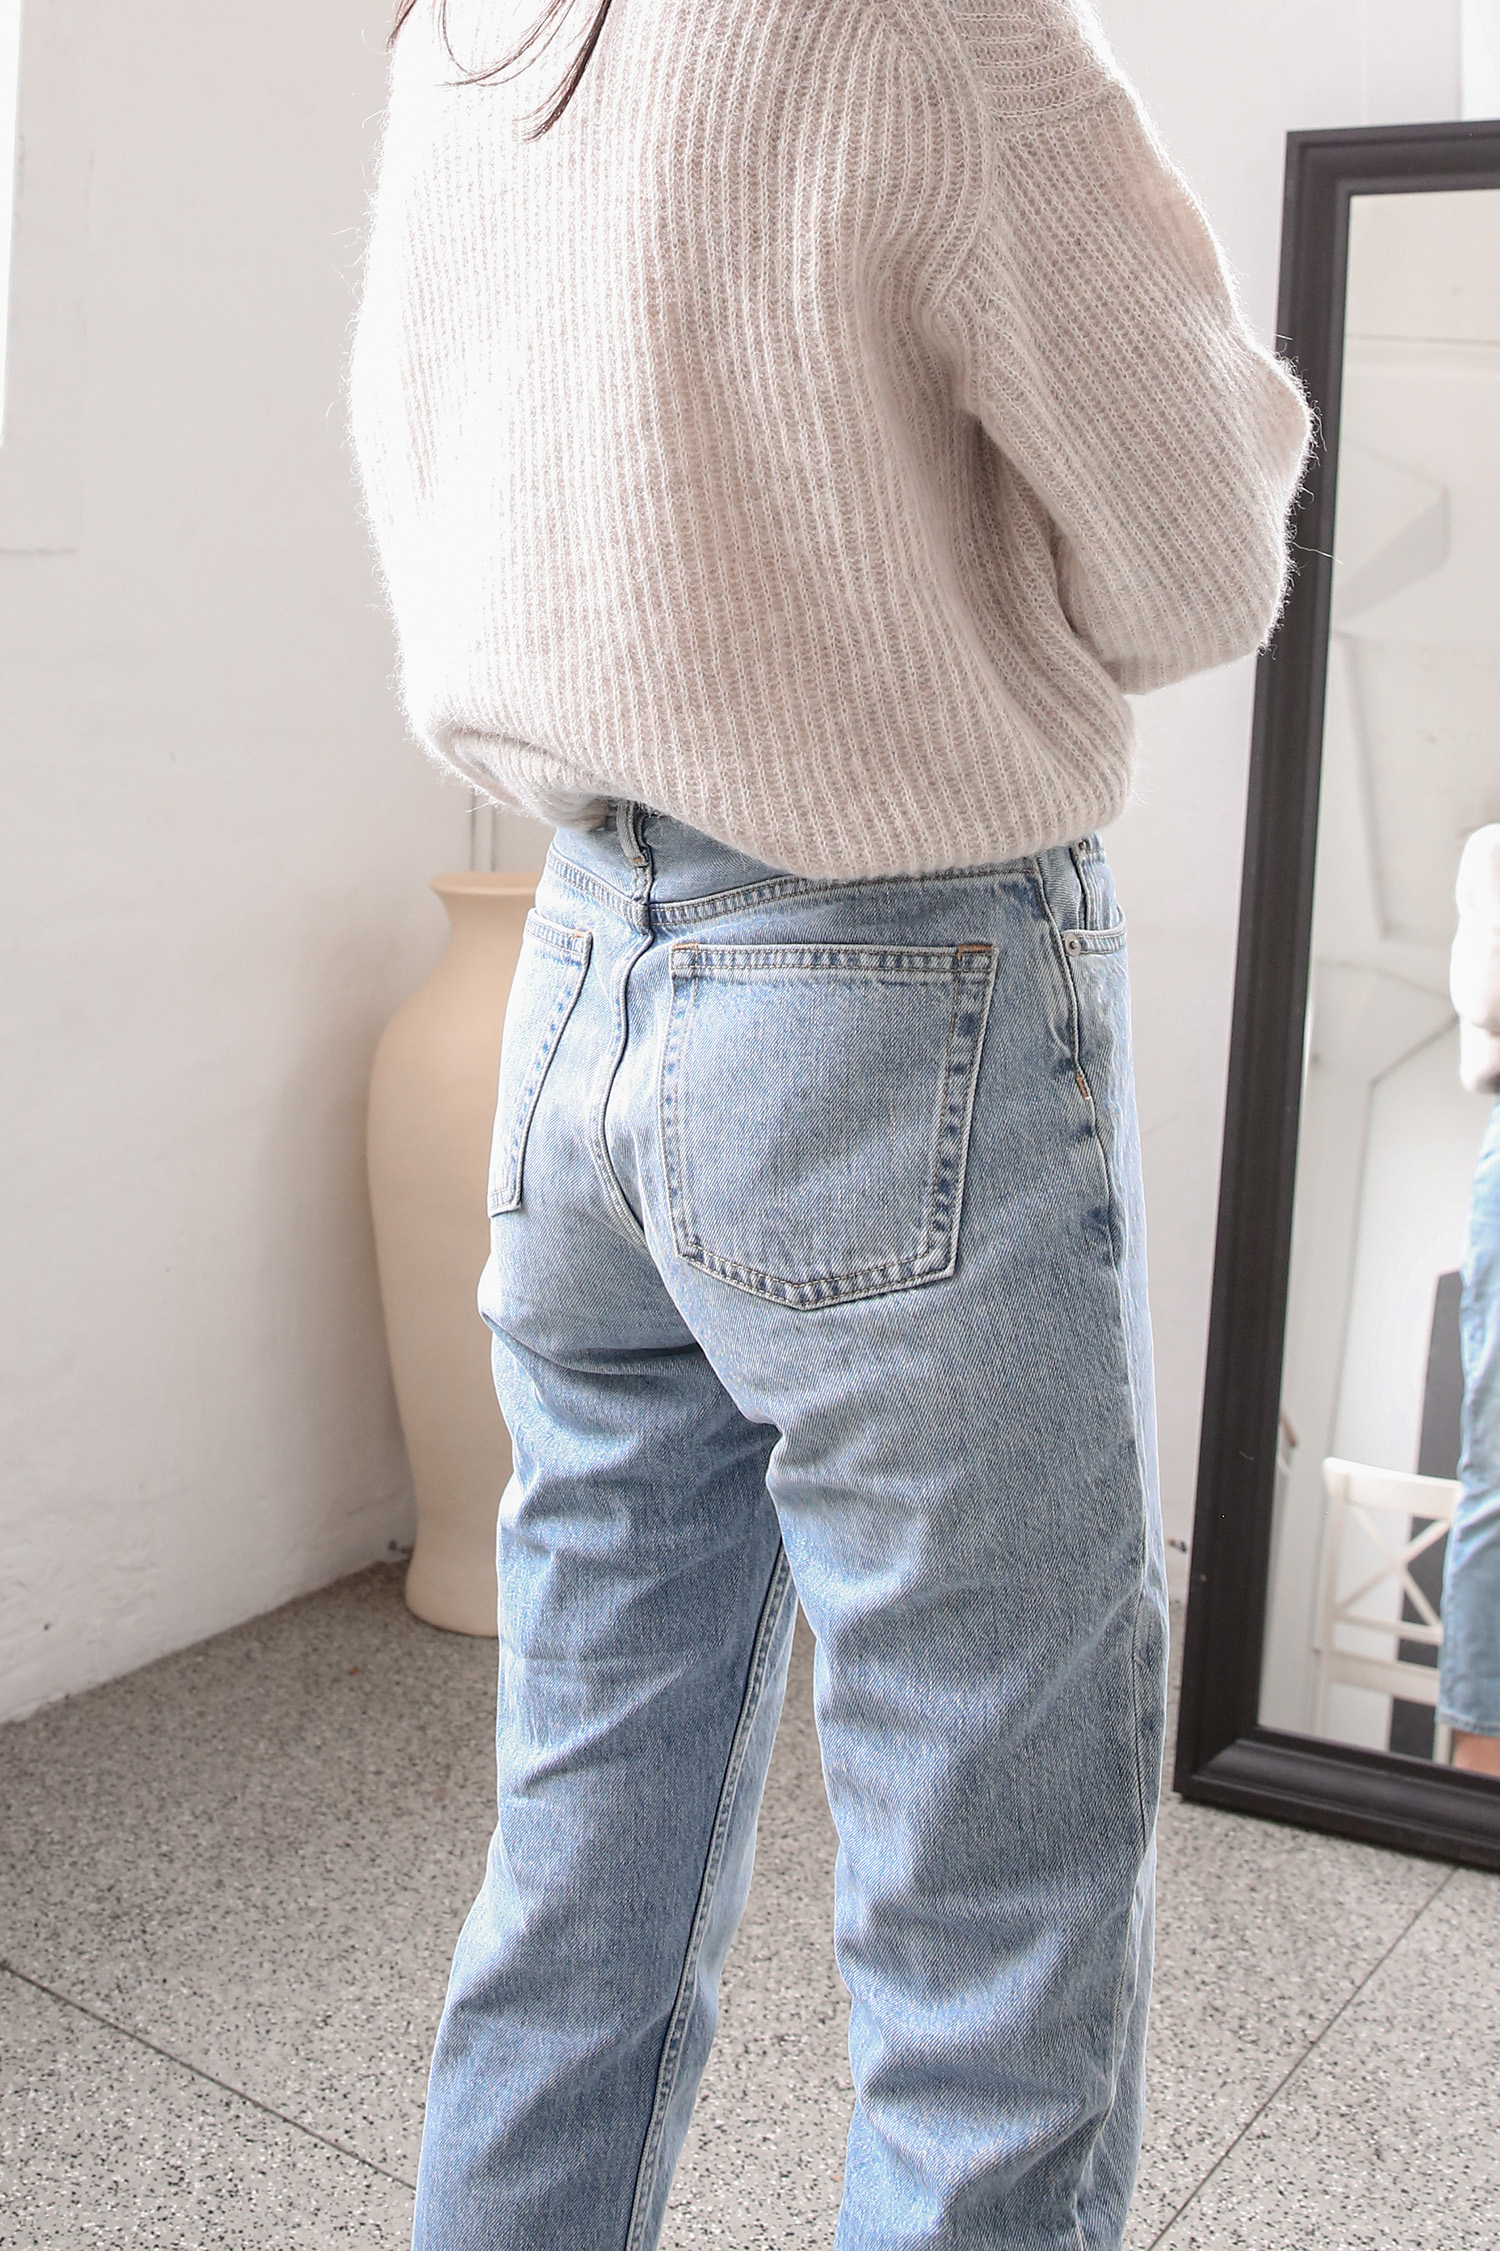 Everlane Denim Guide & Review - Later Ever After, BlogLater Ever